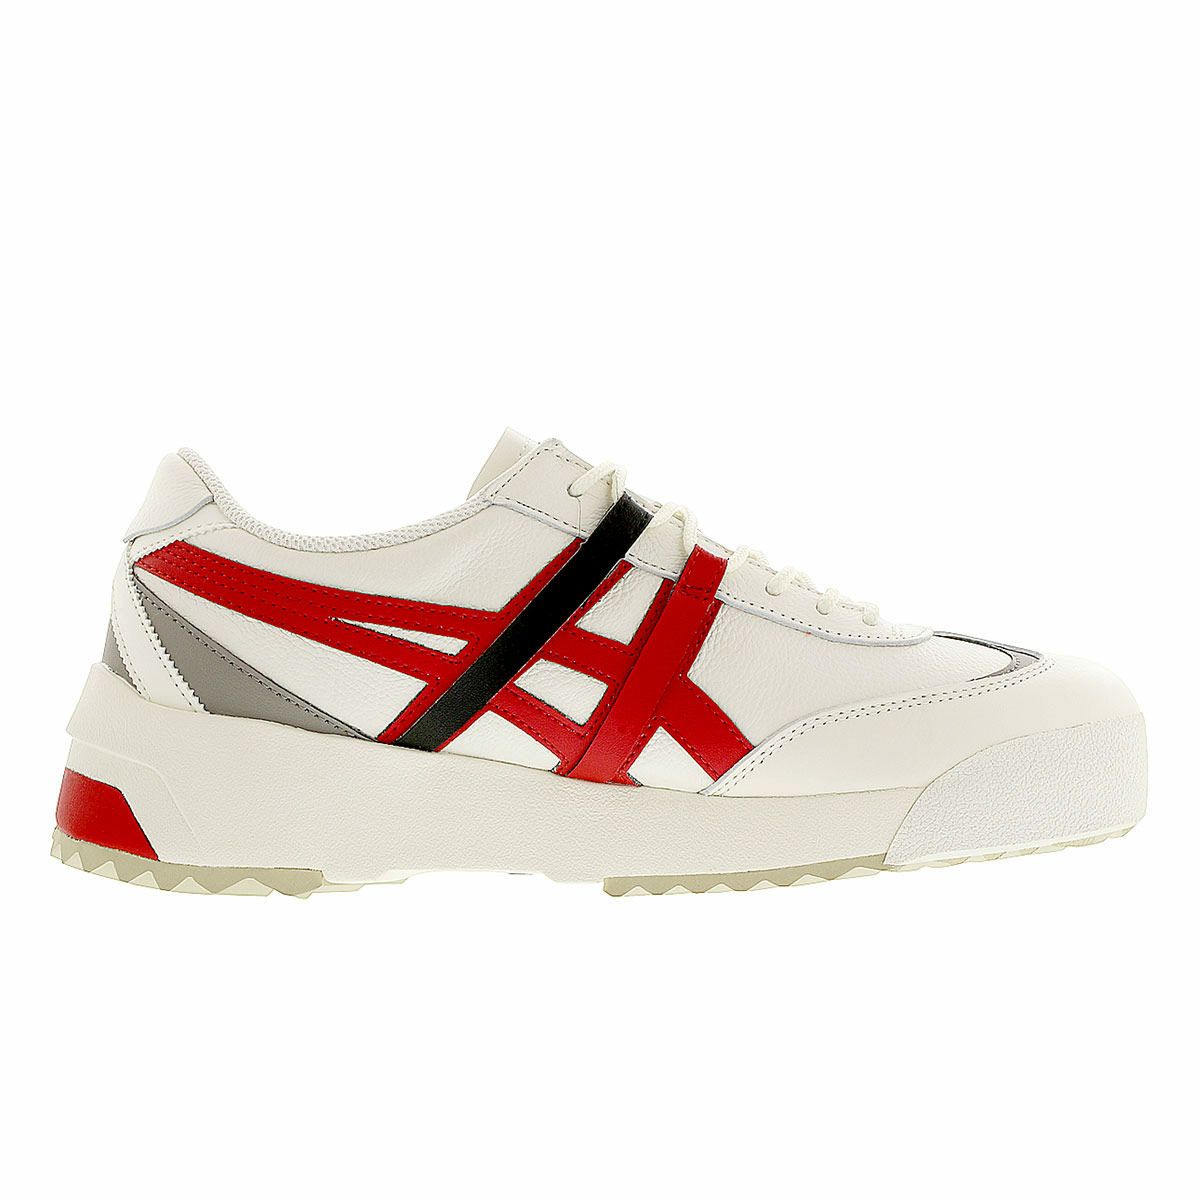 Onitsuka Tiger DELEGATION EX CREAM/CLASSIC RED 1183a559-200